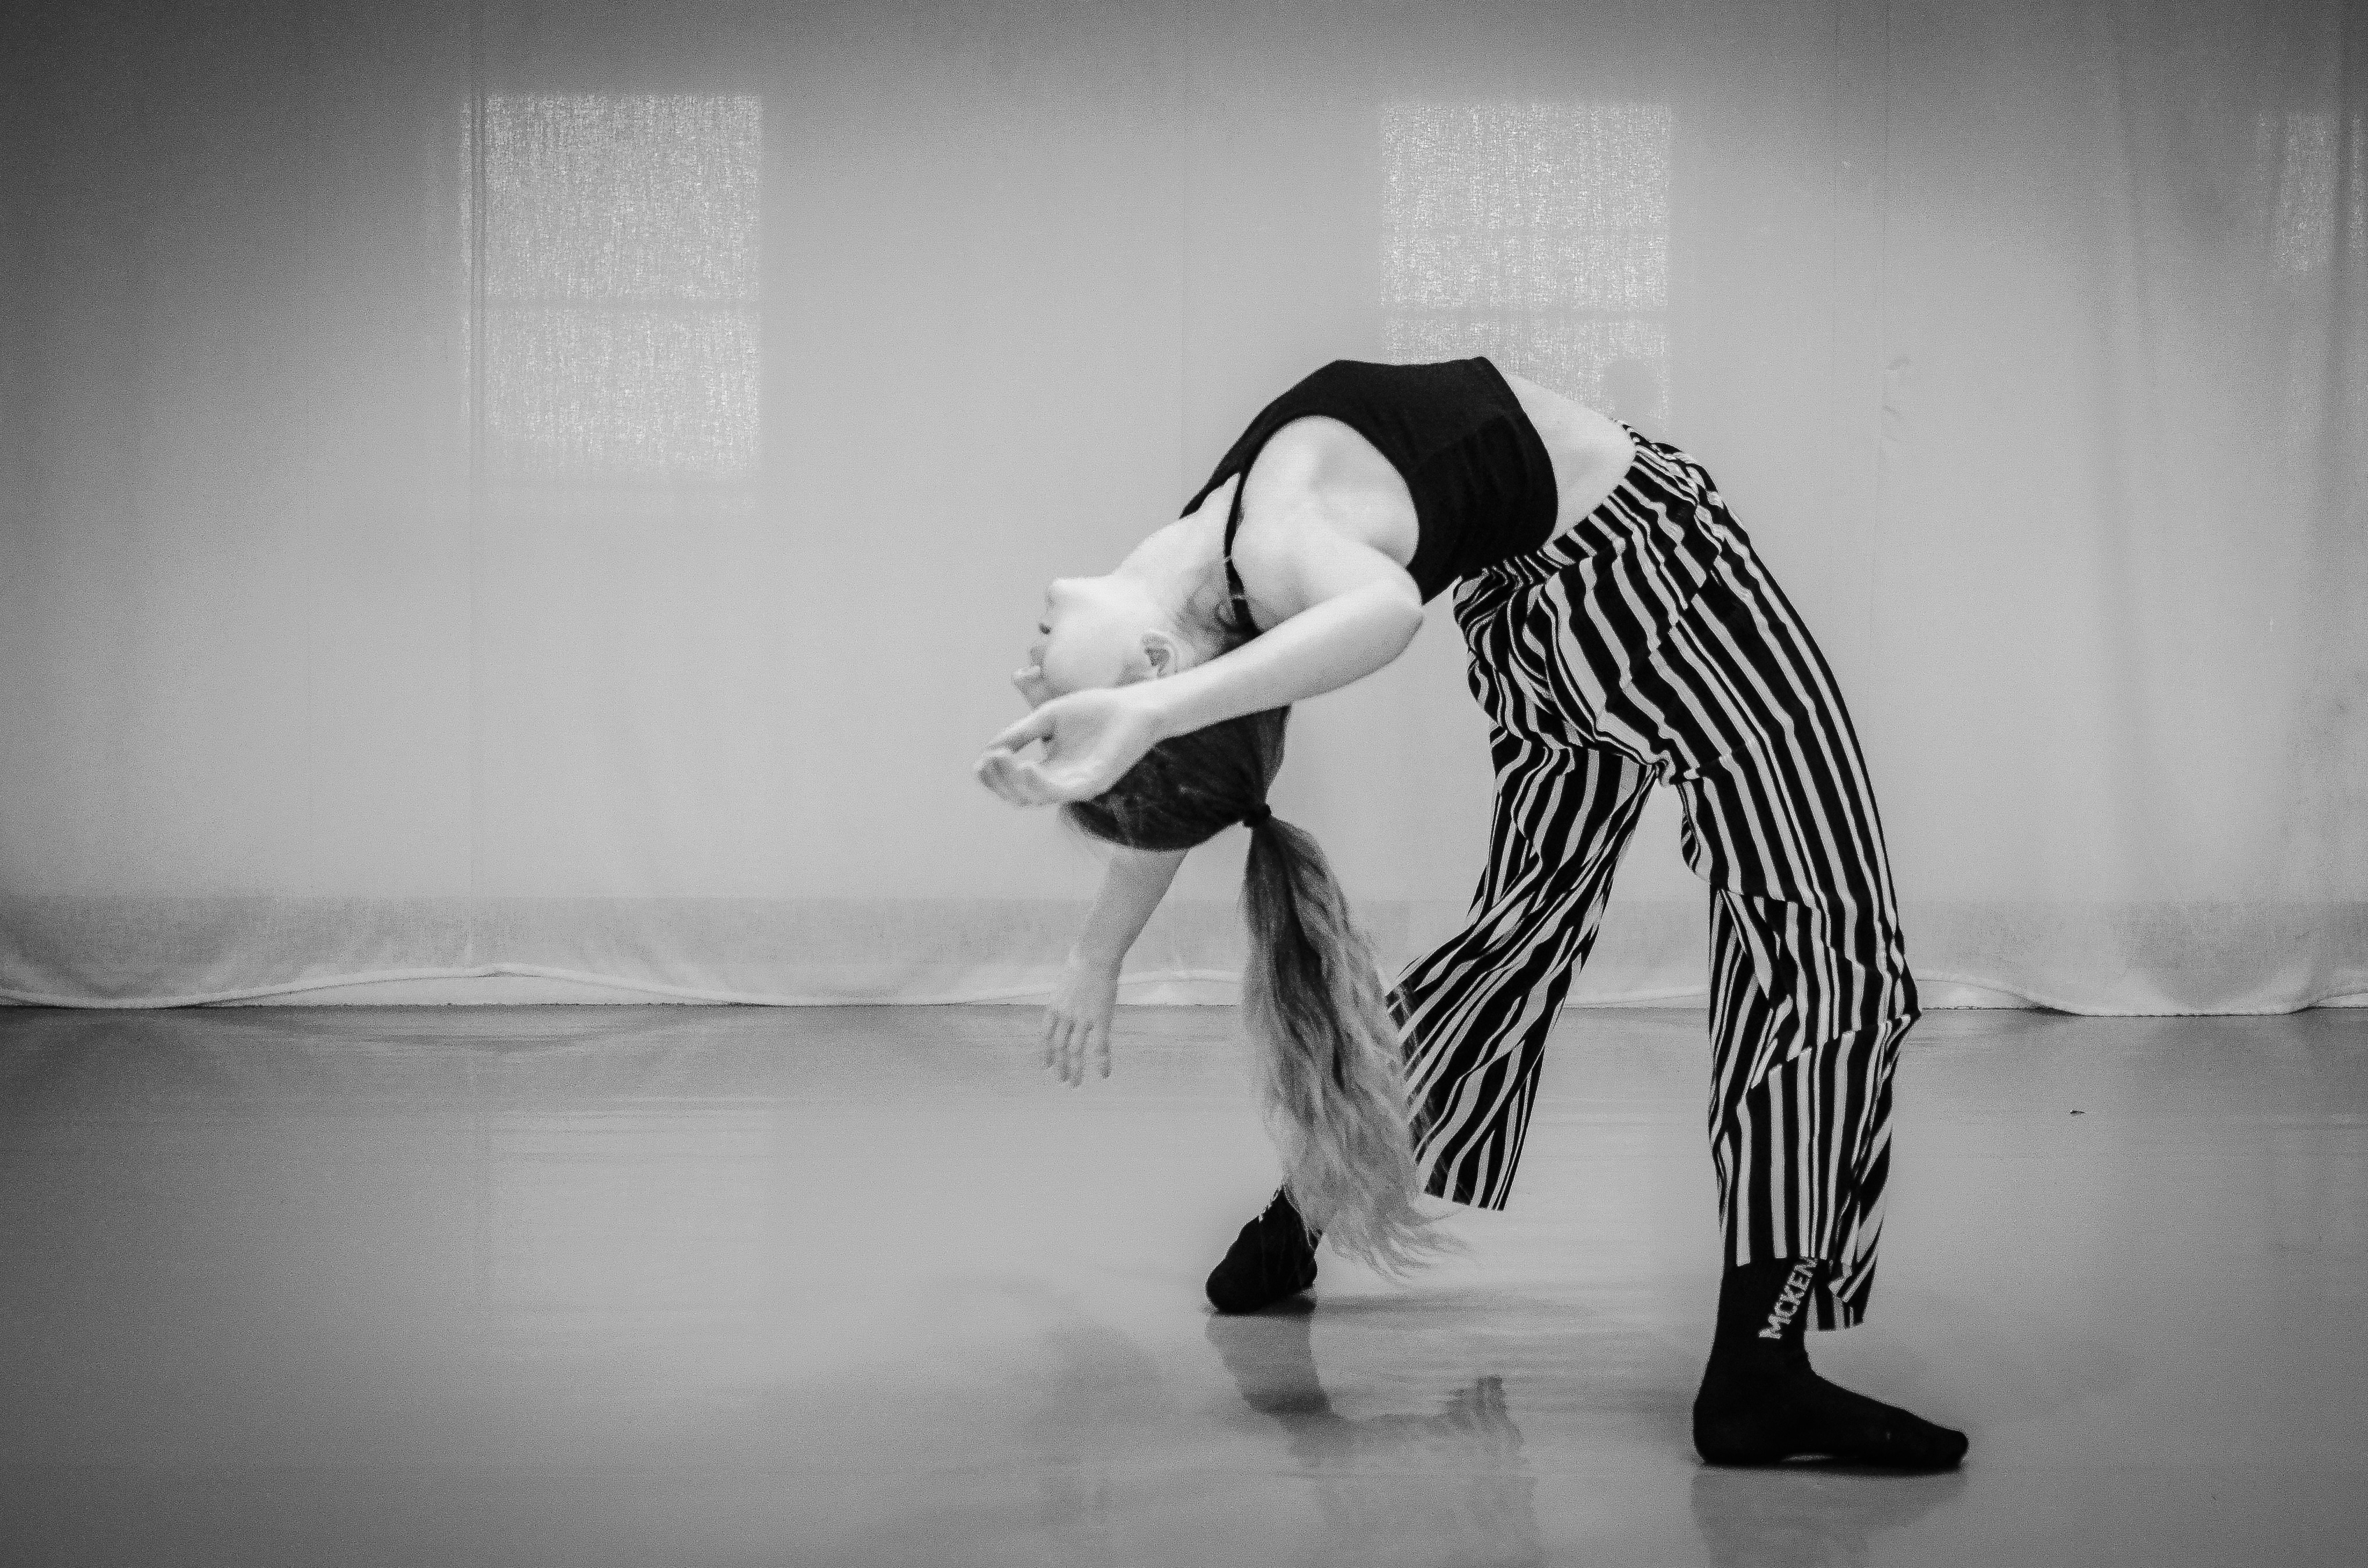 An image filtered in black and white, taken in a studio environment. The photograph captures a dancer (myself) in an arched position, with the arch in my back captured from the side. I am wearing striped trousers and a plain black vest top. My hair is long and held in a pony tail that is hanging towards the floor.